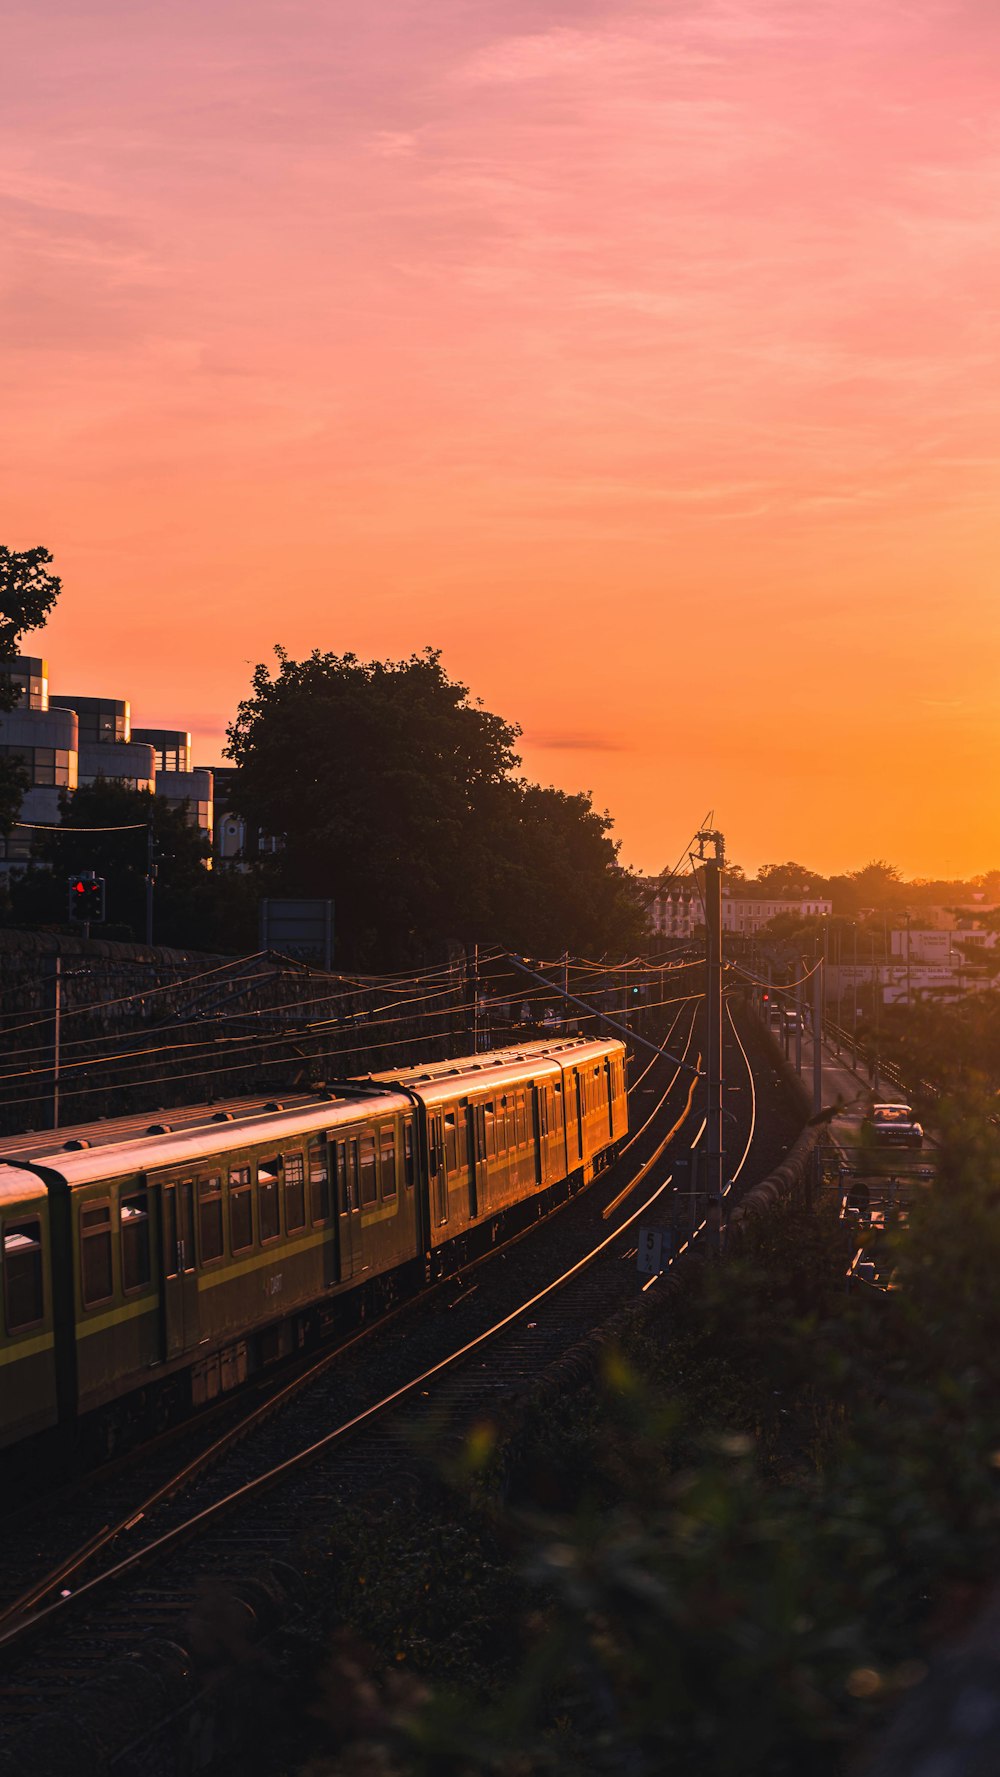 yellow and black train on rail tracks during sunset